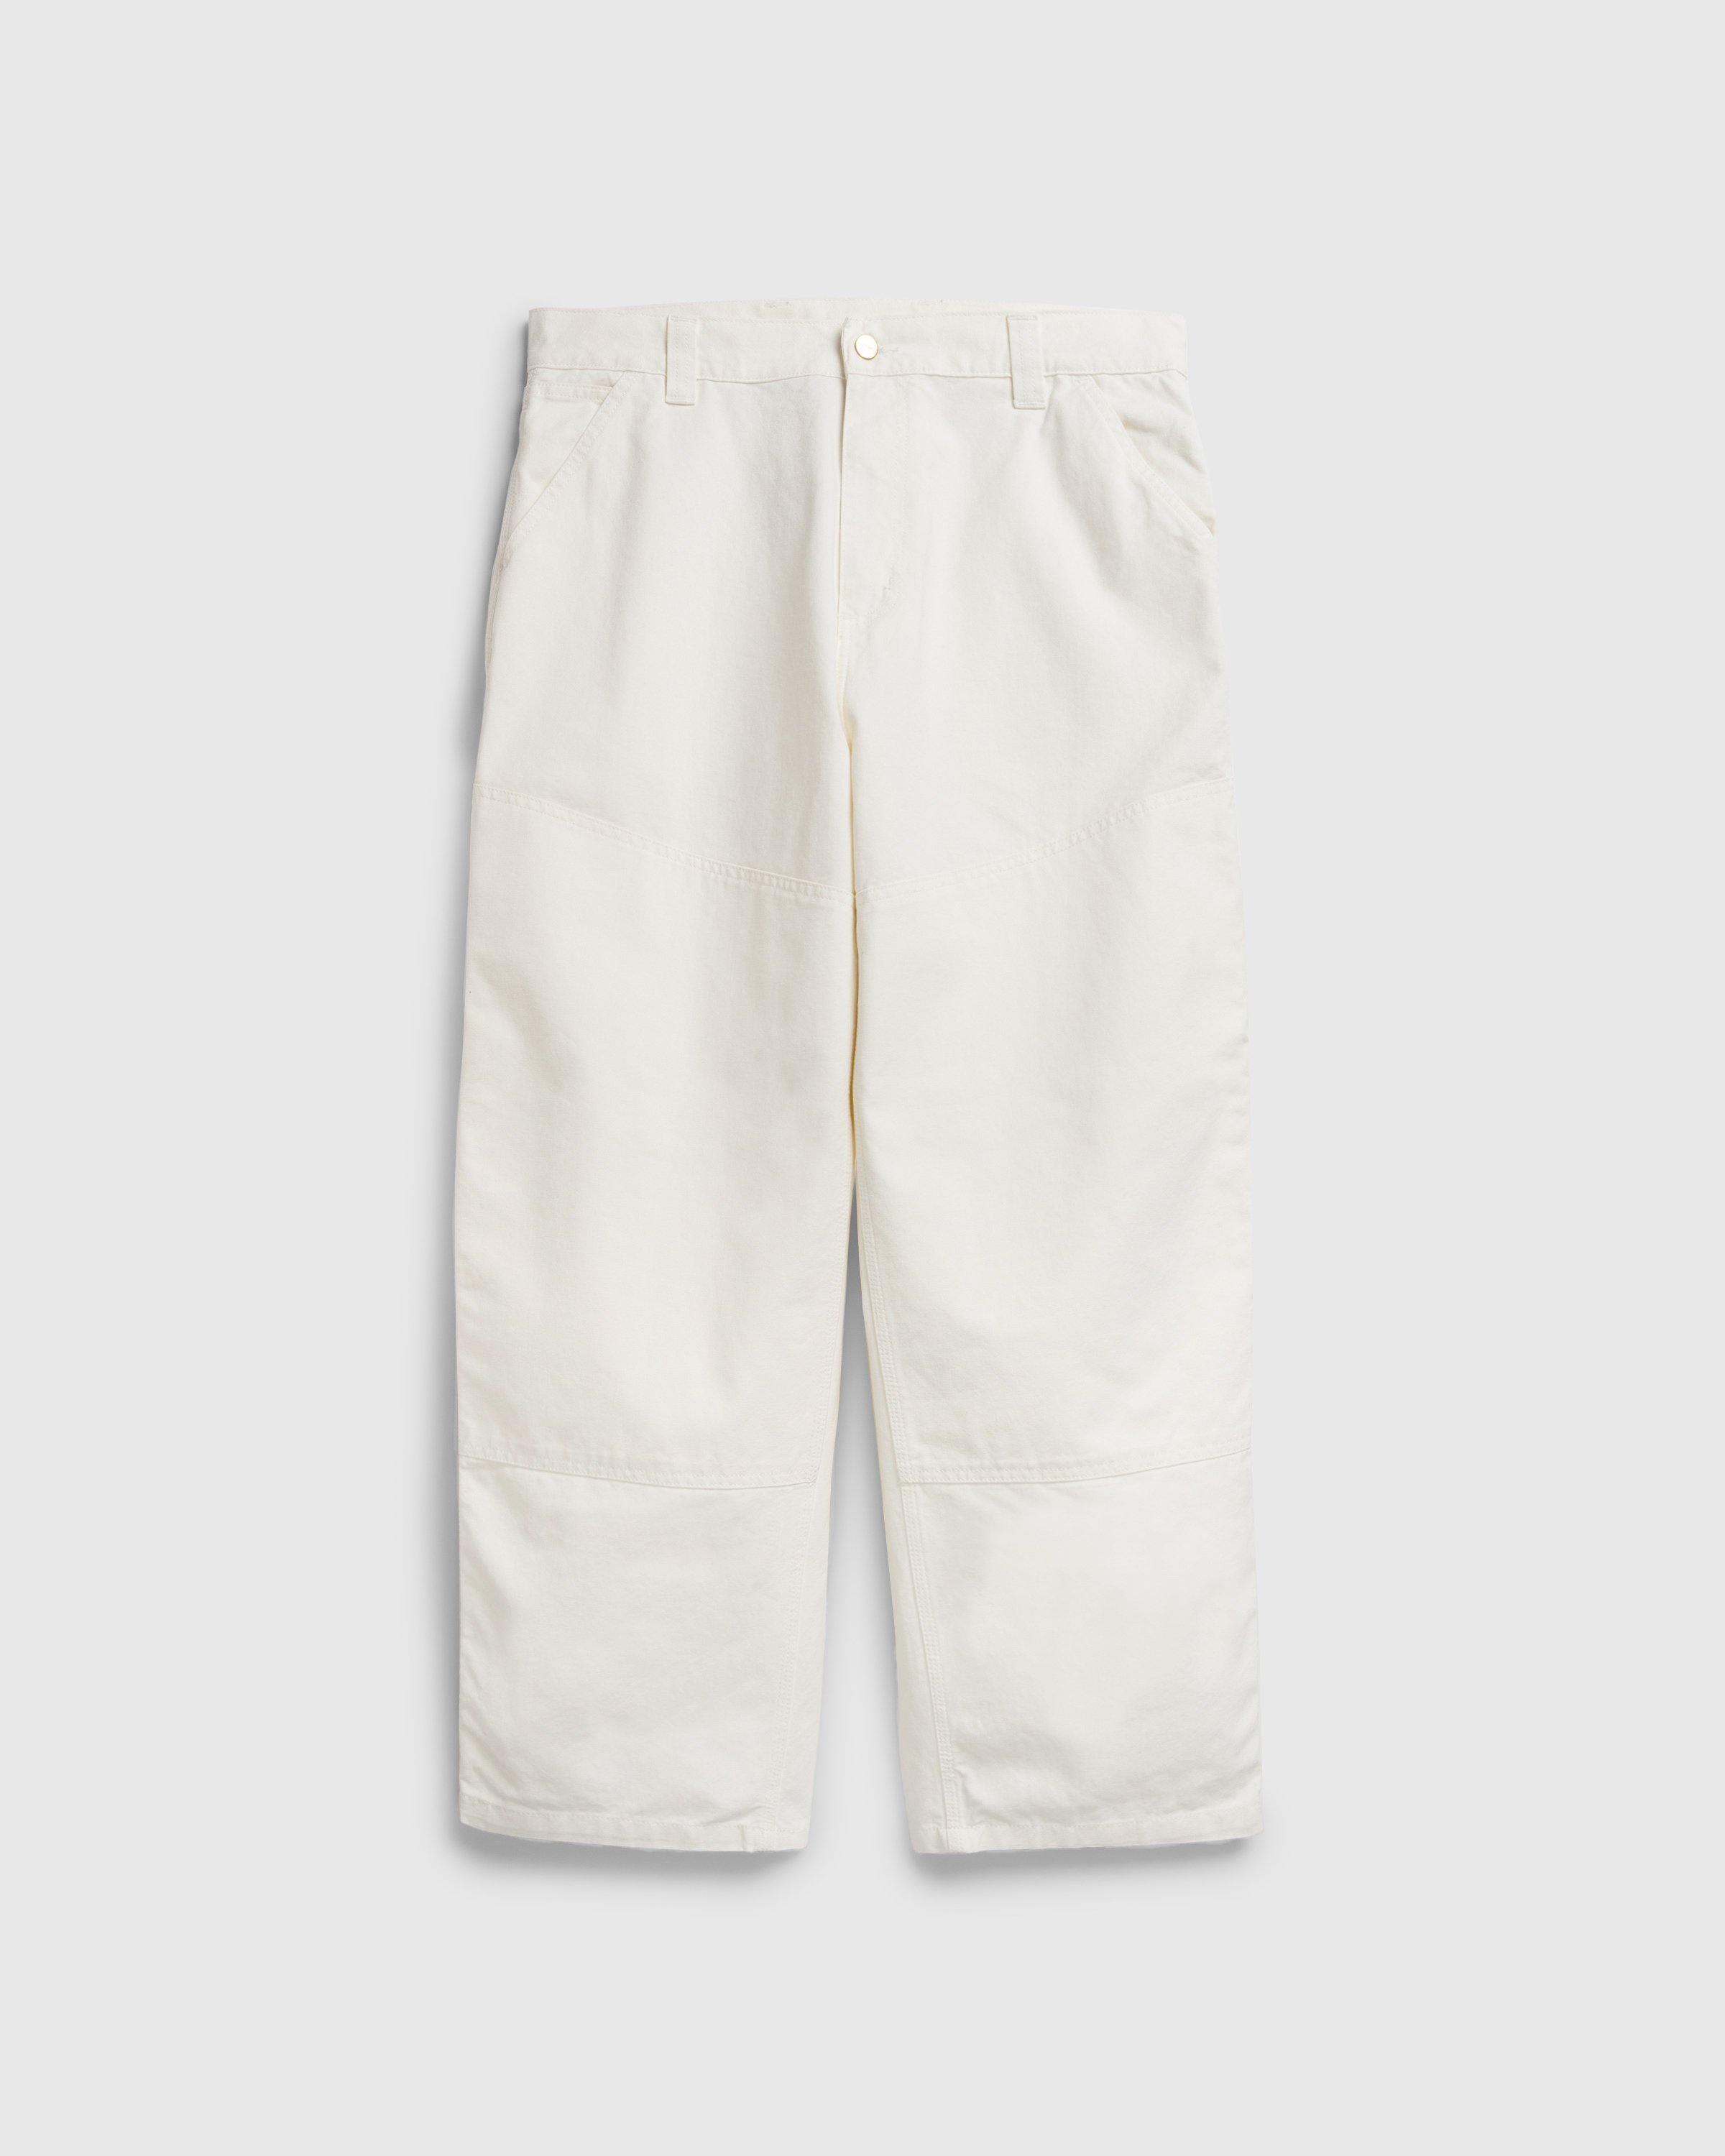 Carhartt WIP - Wide Panel Pant Wax /rinsed - Clothing - White - Image 1